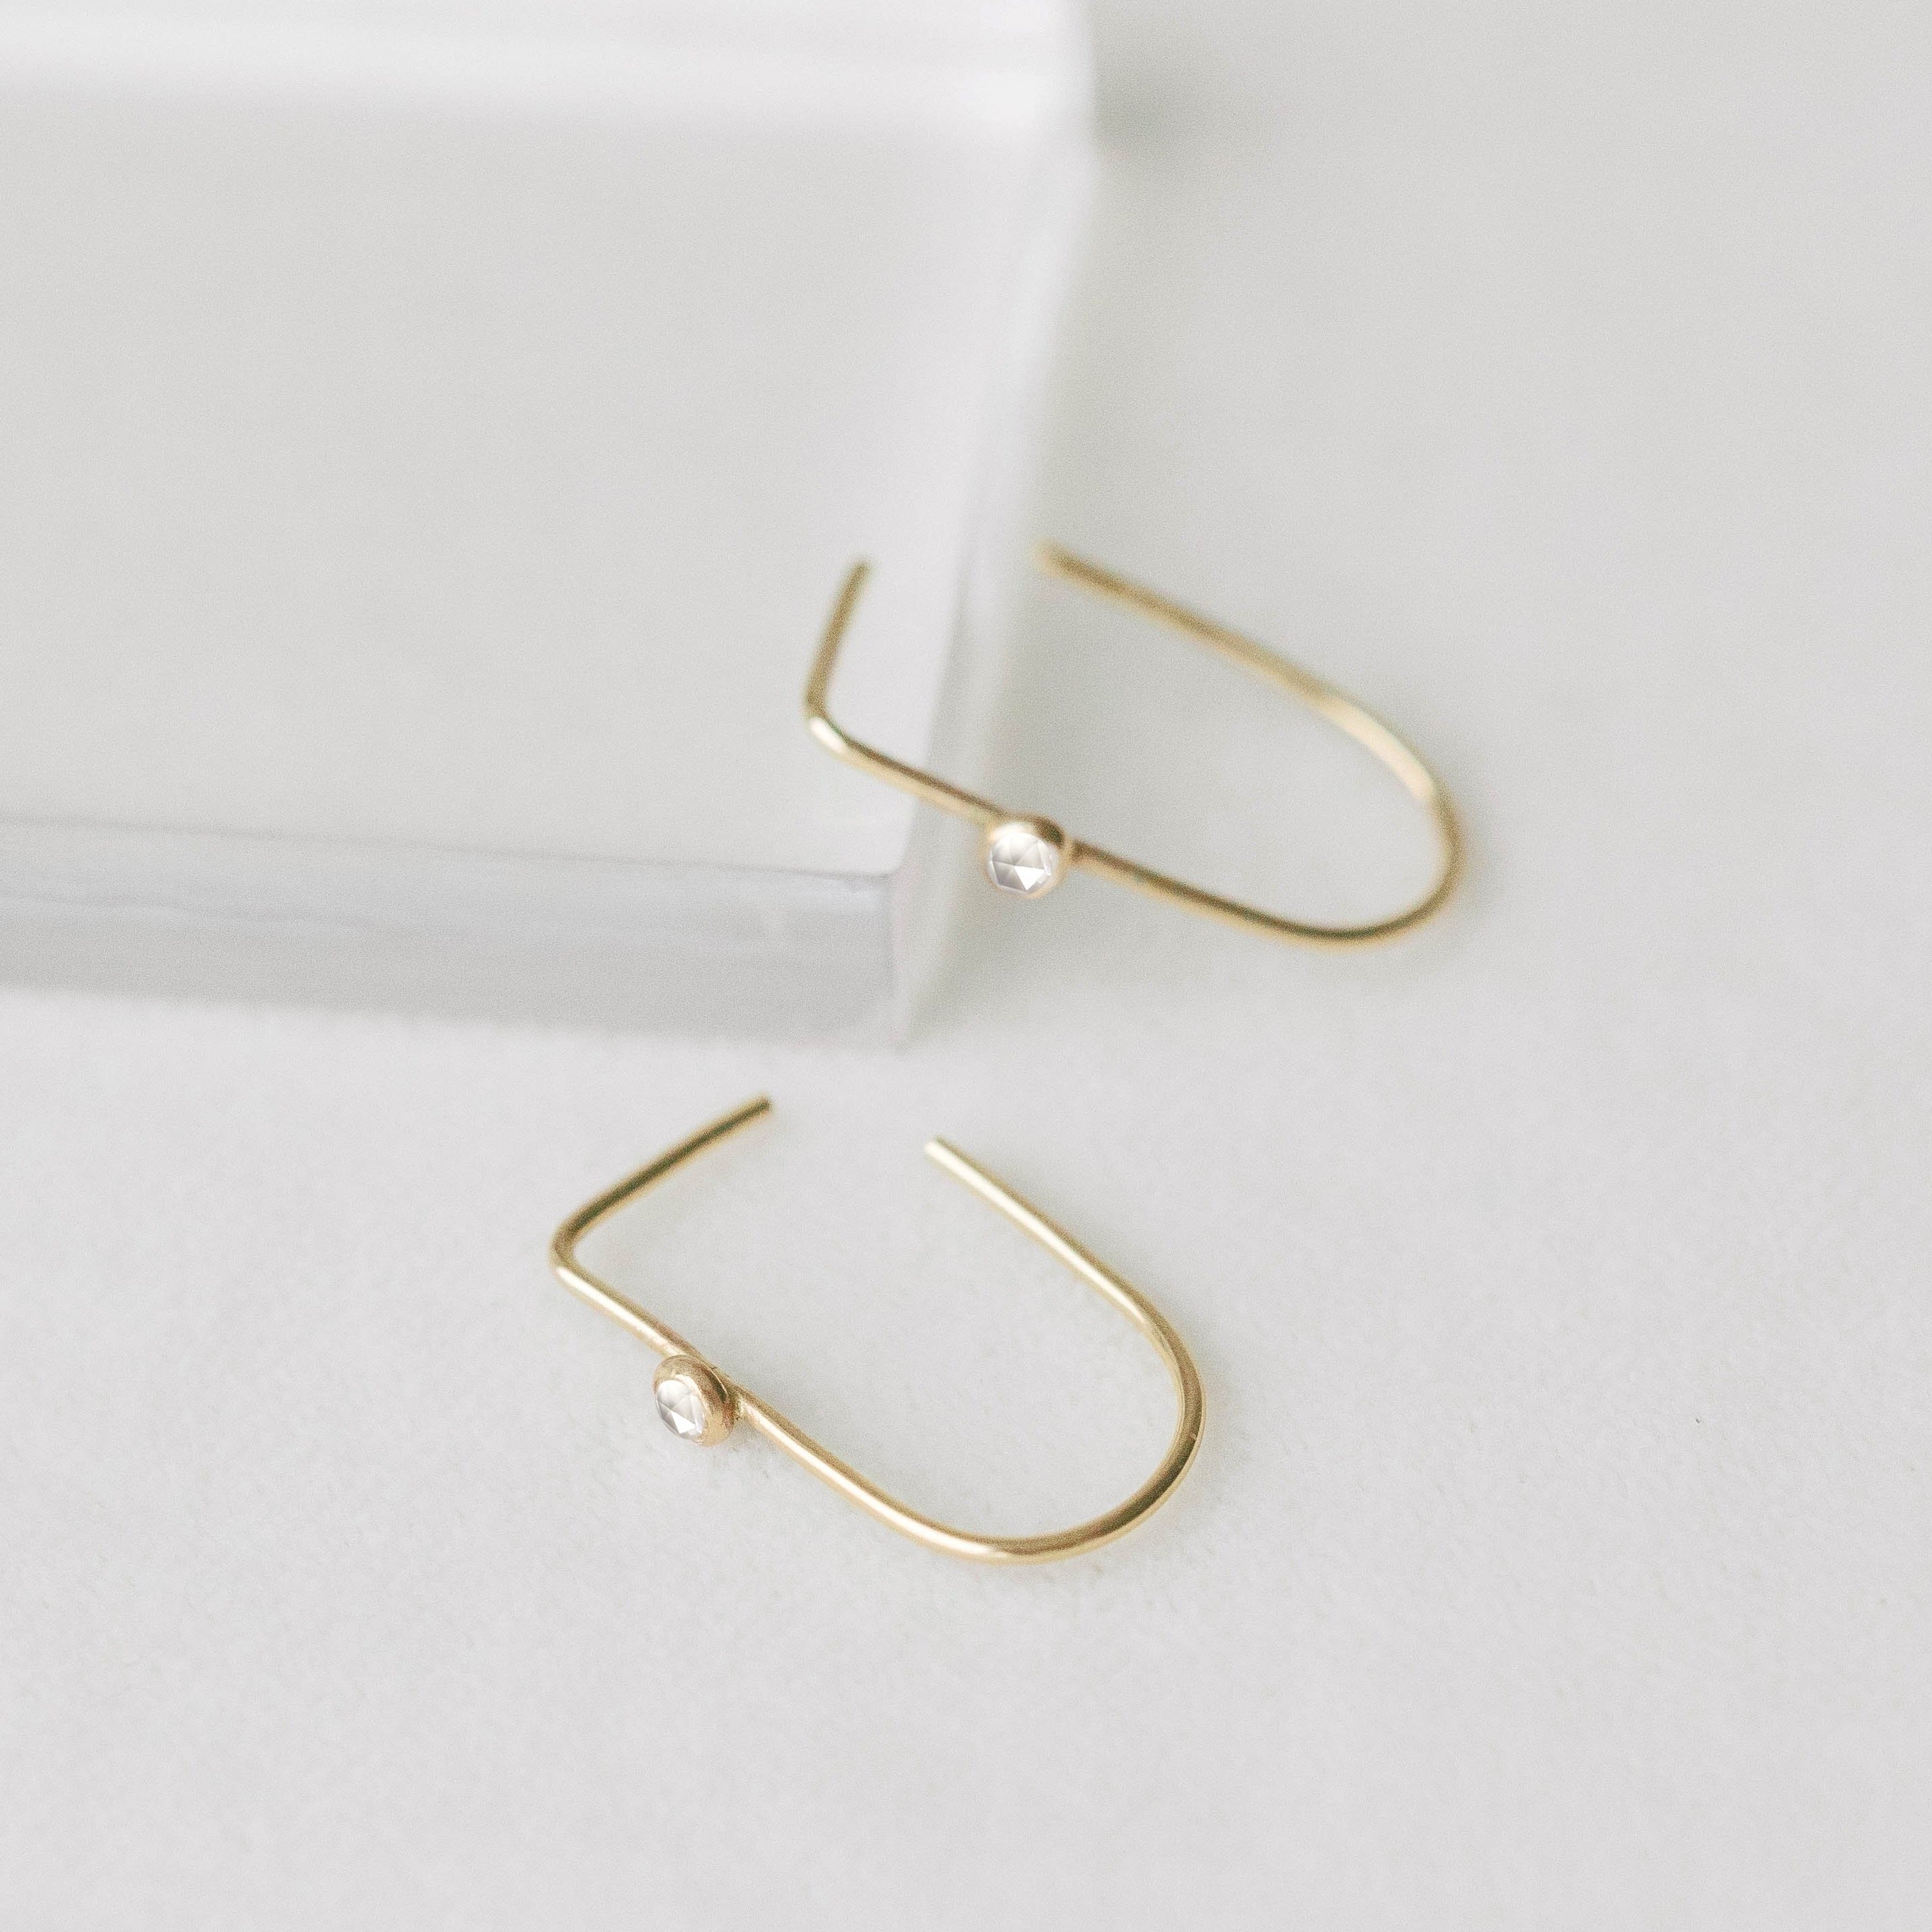 Big gold hoop earrings. Thin and light with genuine white topaz gemstones.